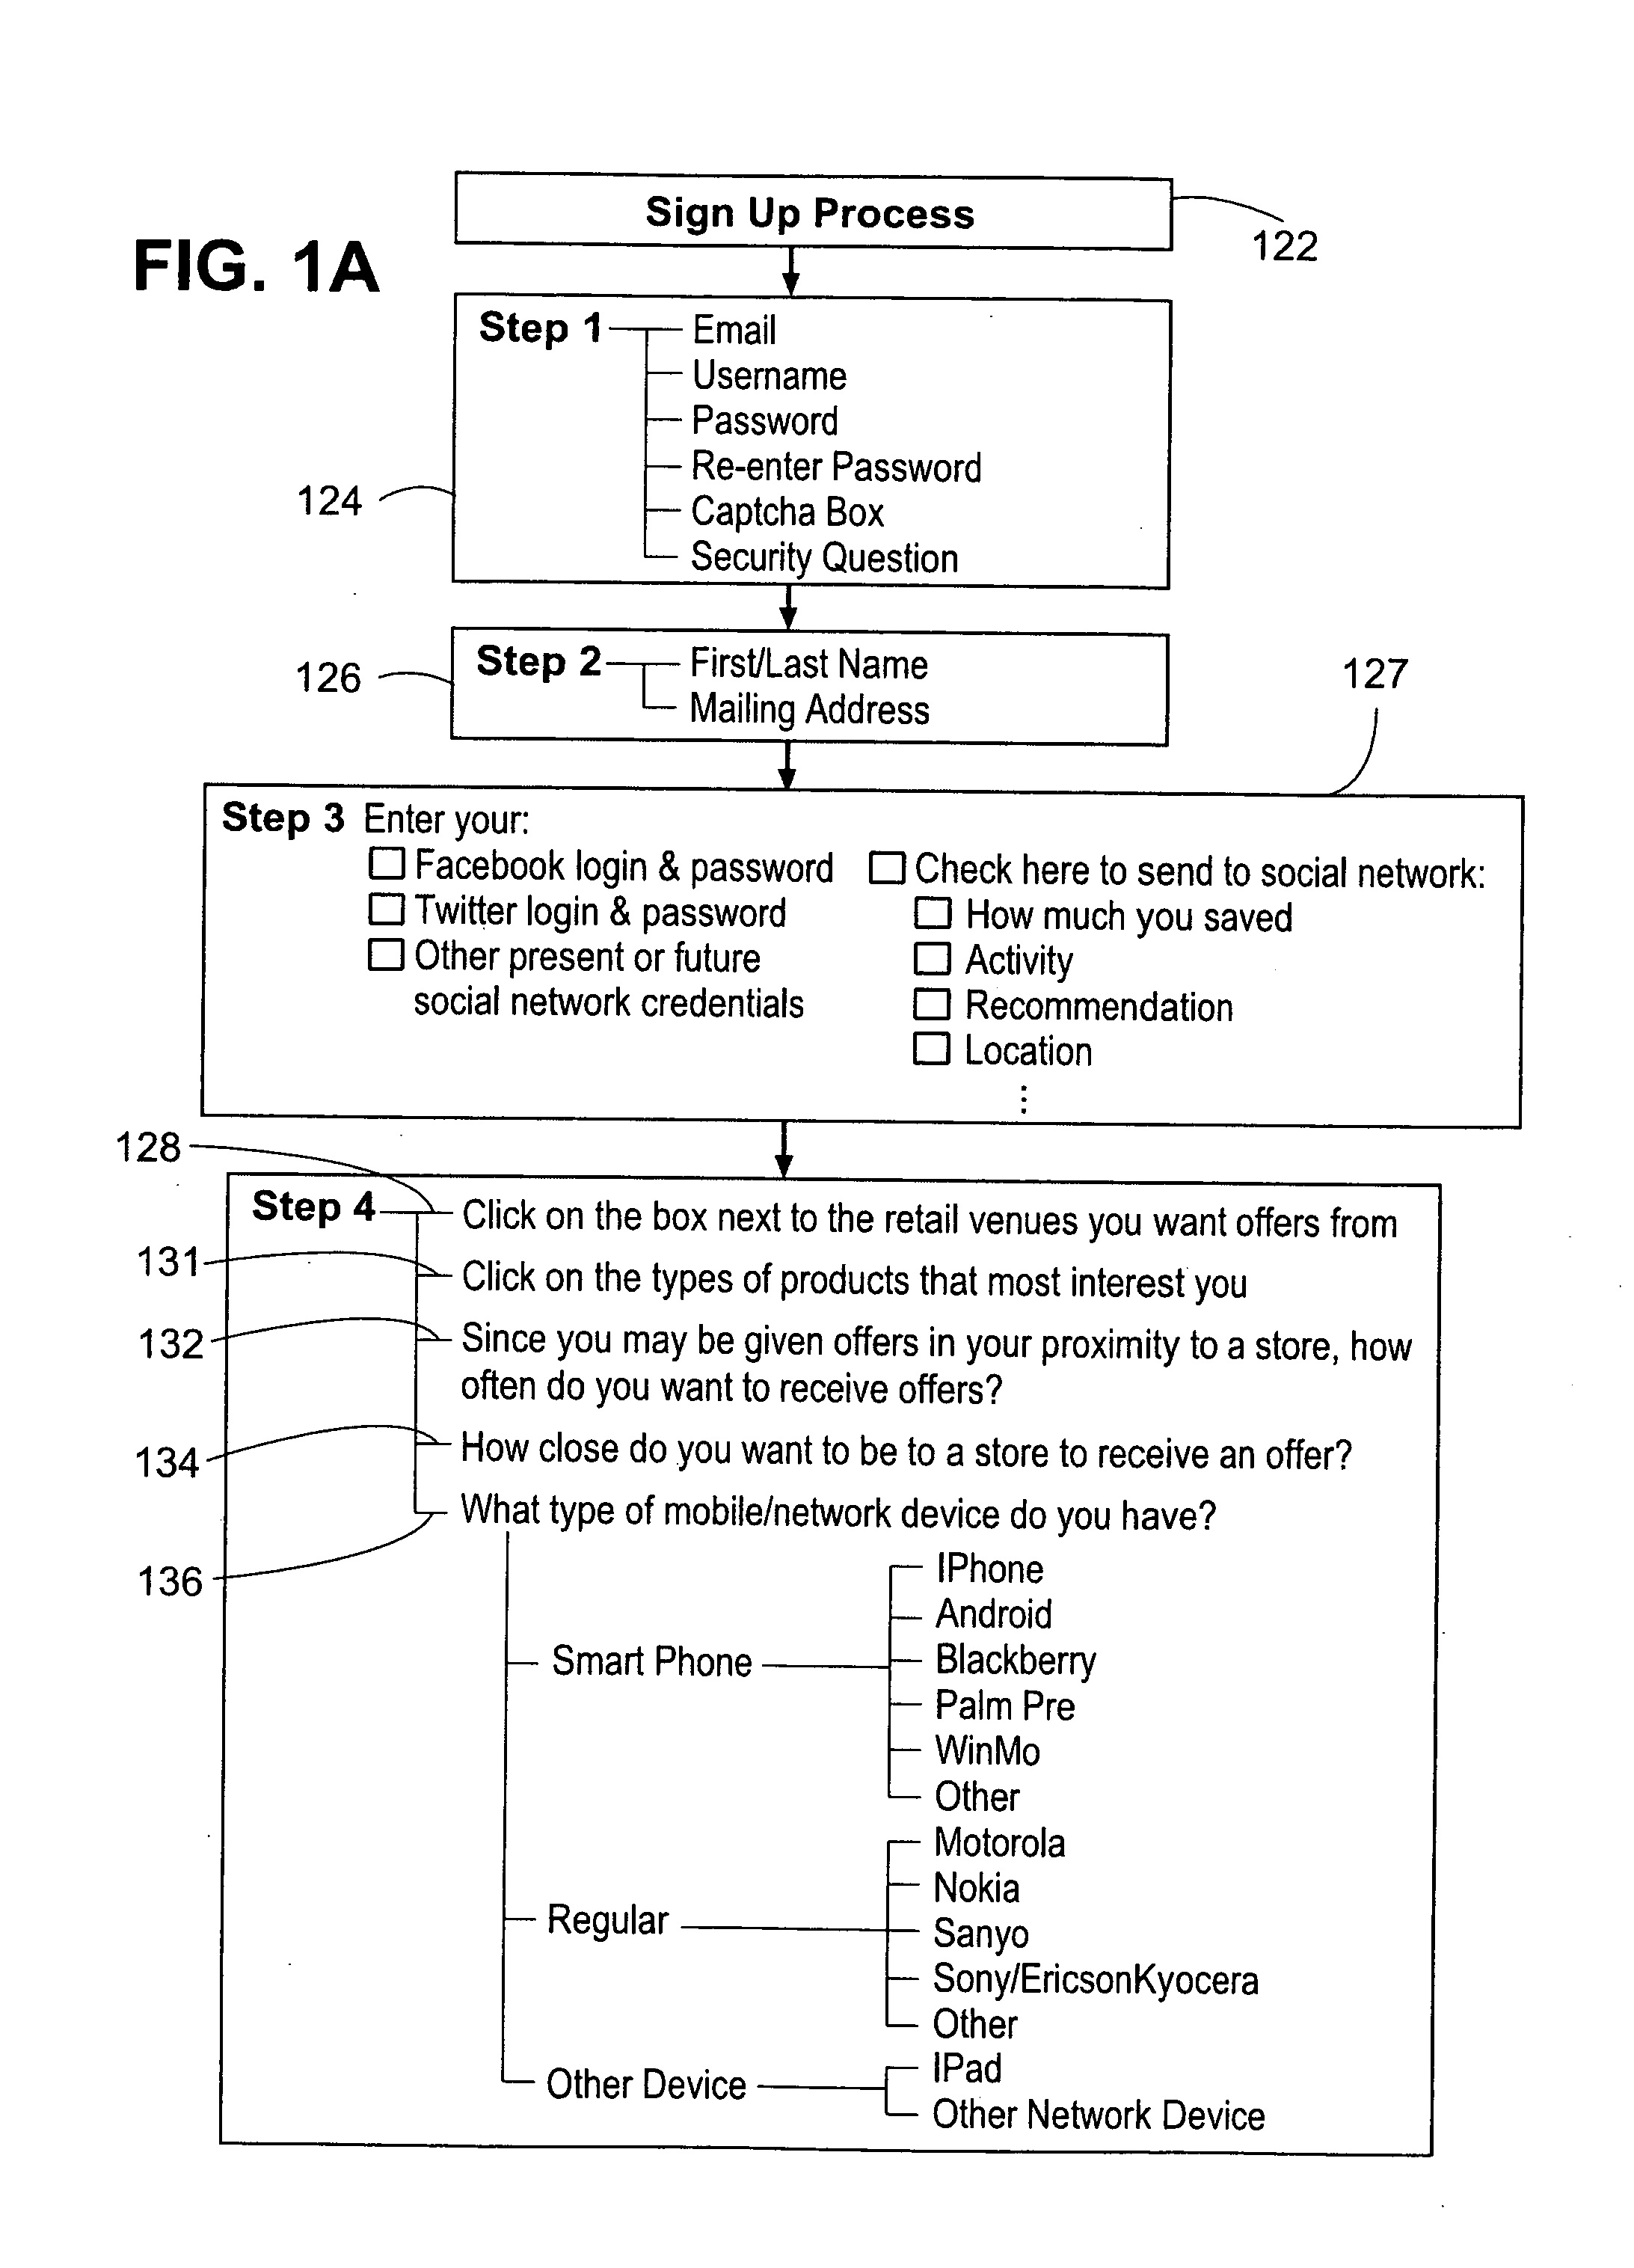 Electronic incentivie methods and systems for enabling carbon credit rewards and interactive participation of individuals and groups within the system